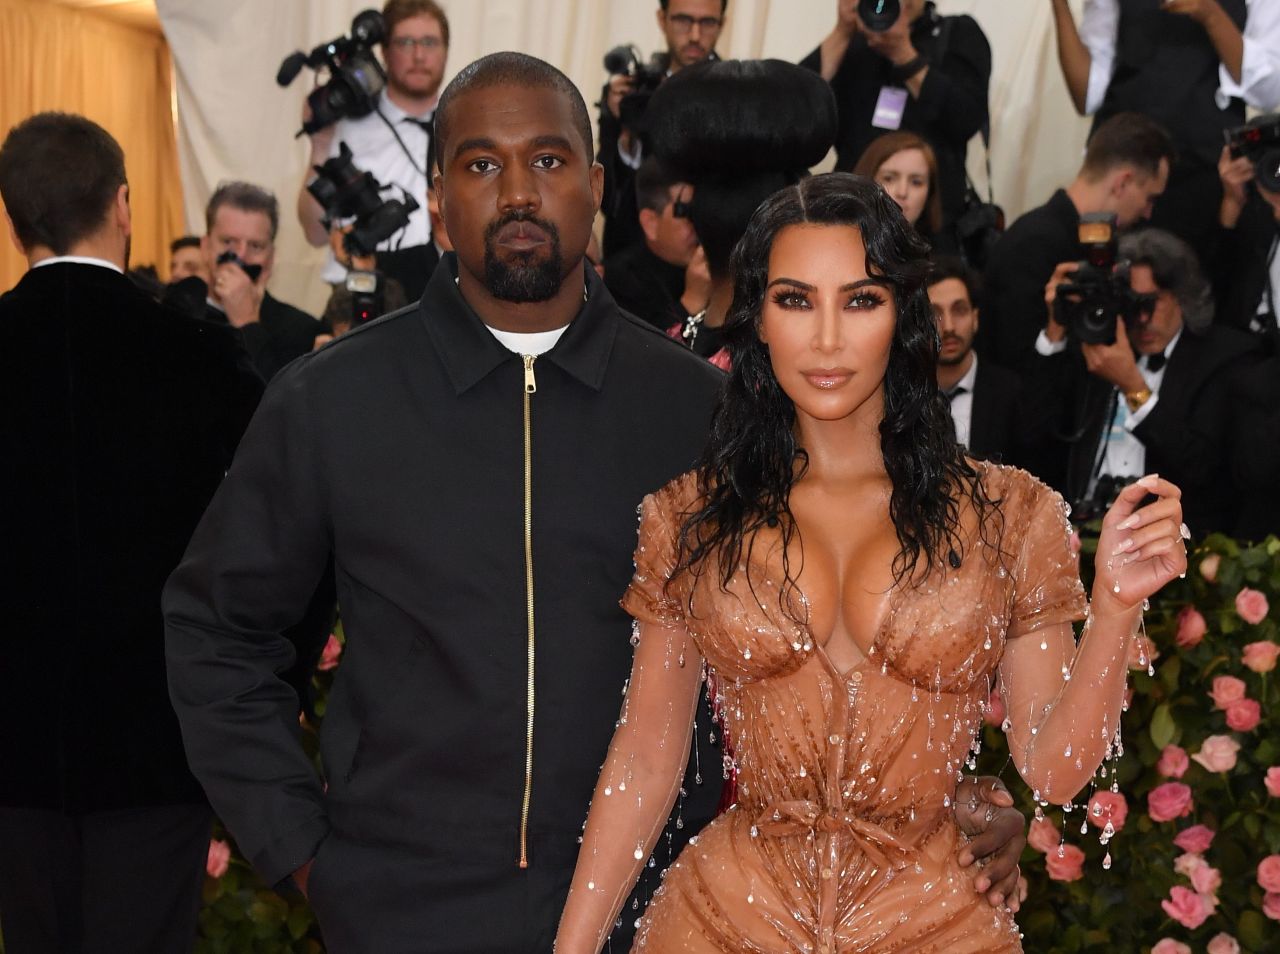 Kim and Kanye arrive for the Met Gala in New York in May 2019.